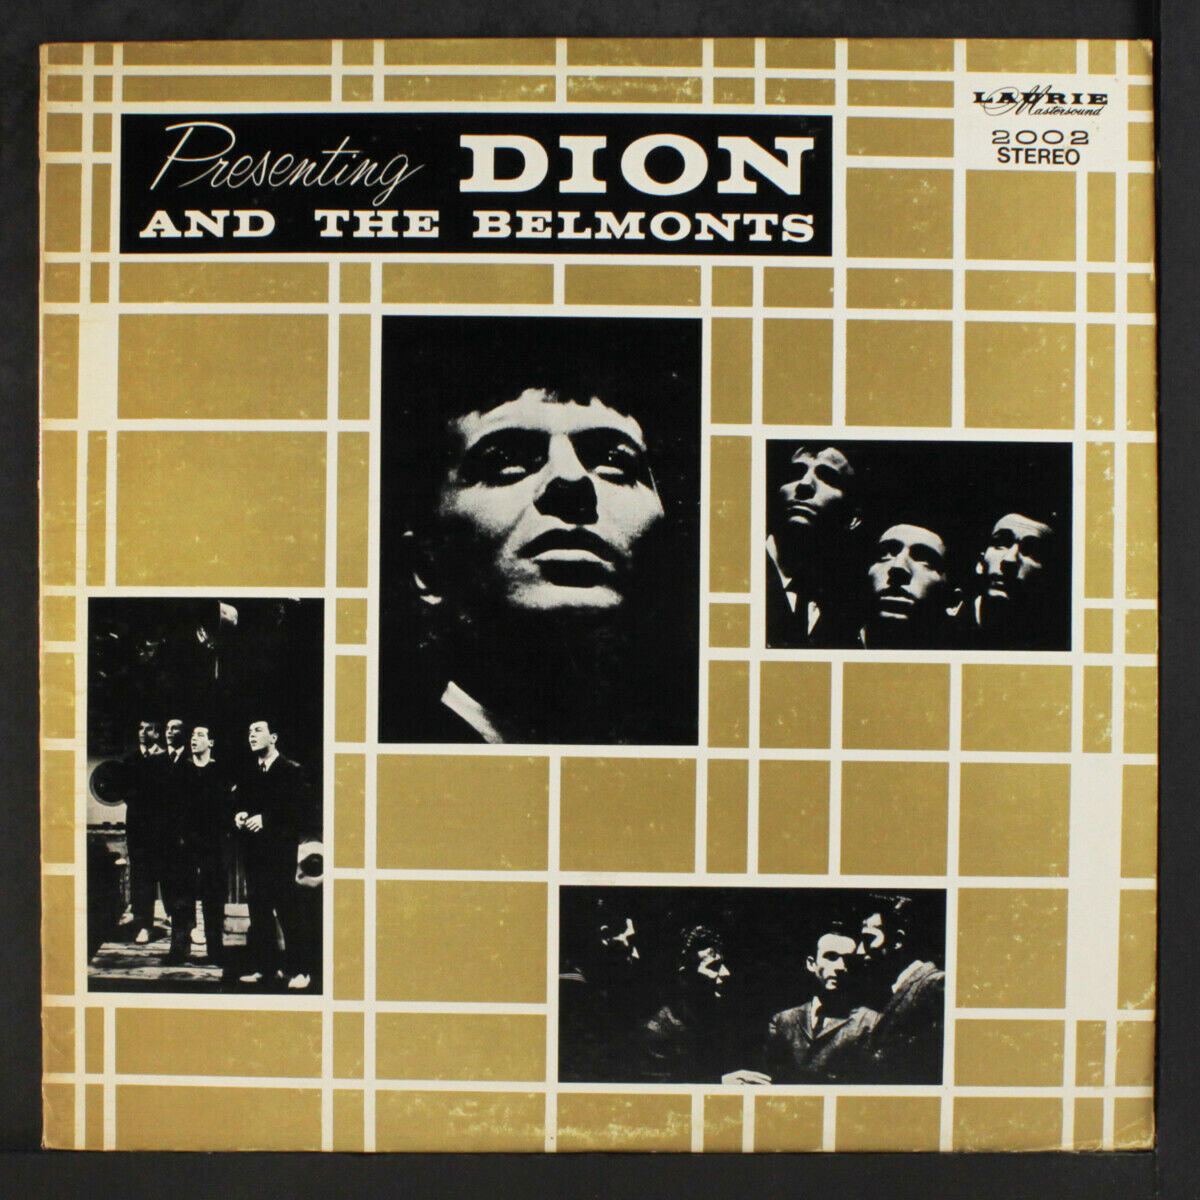 Dion & The Belmonts, Presenting Dion and The Belmonts